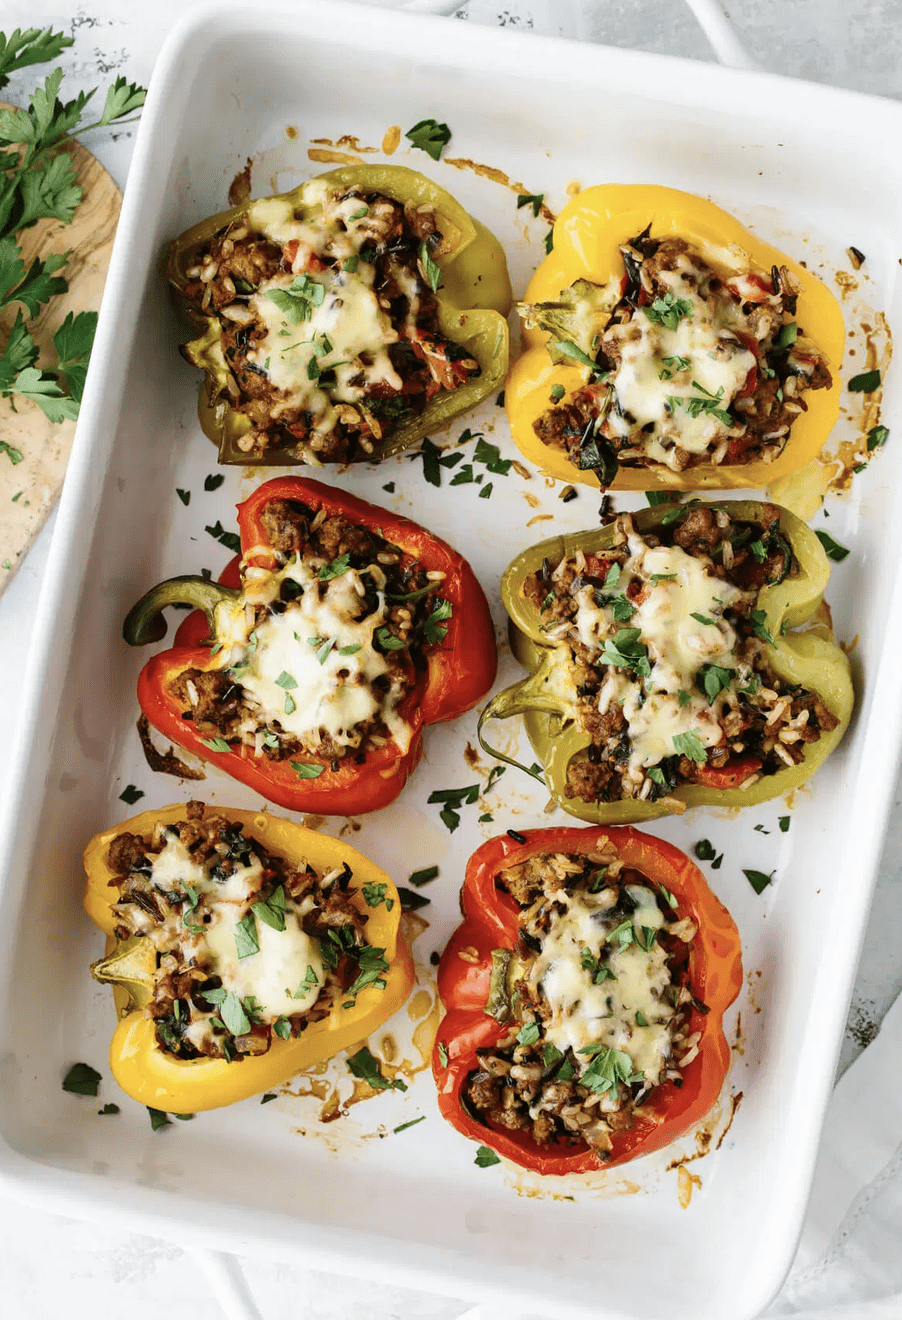 Weekly Meal Plan featuring September produce: Stuffed Peppers from Downshiftology